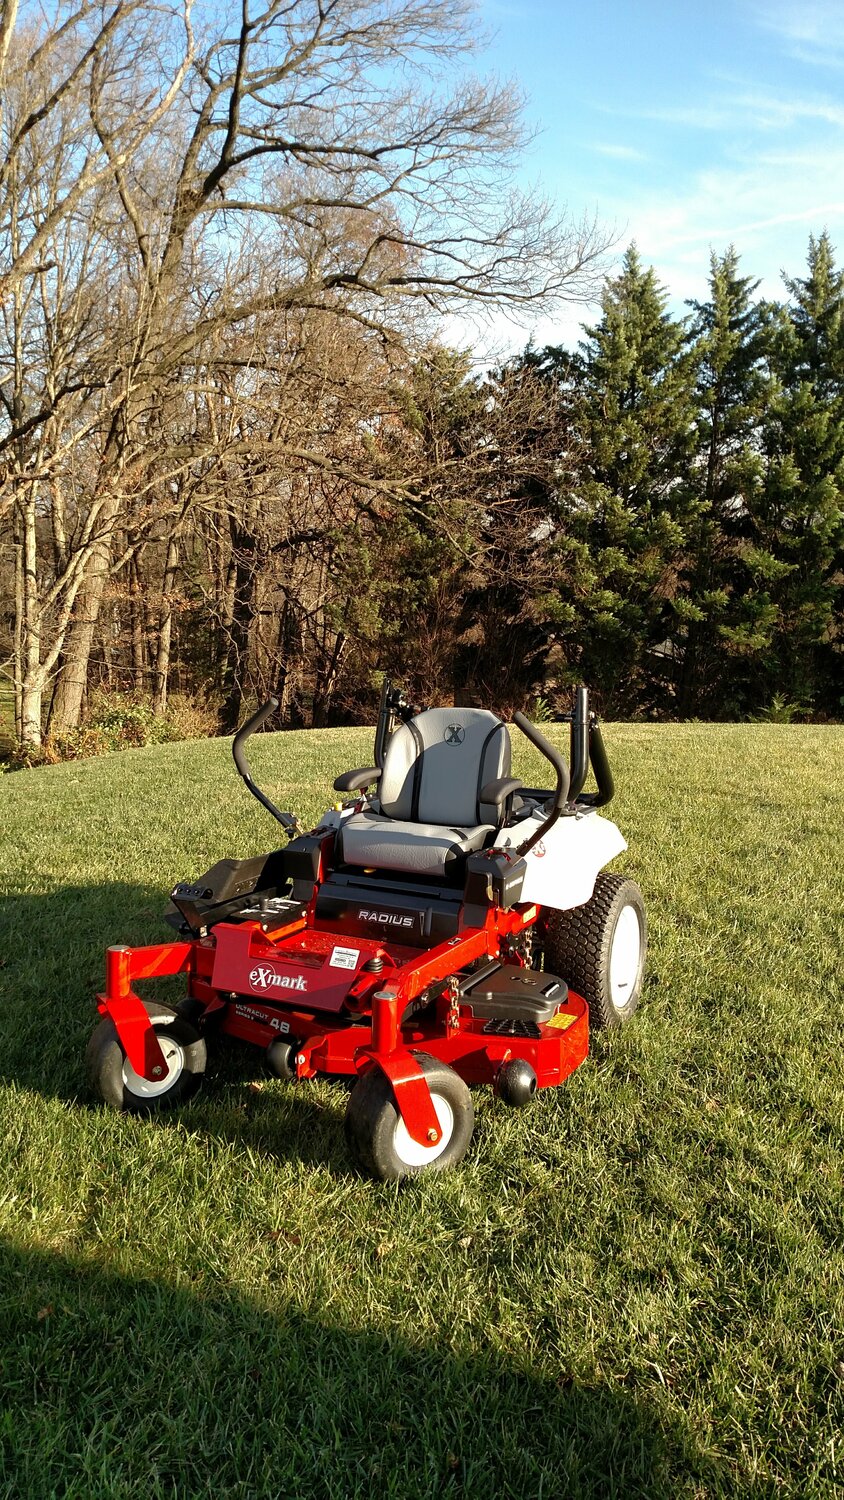 <p><span style="font-weight: bold;">Weekly Mowing</span>&nbsp;</p>